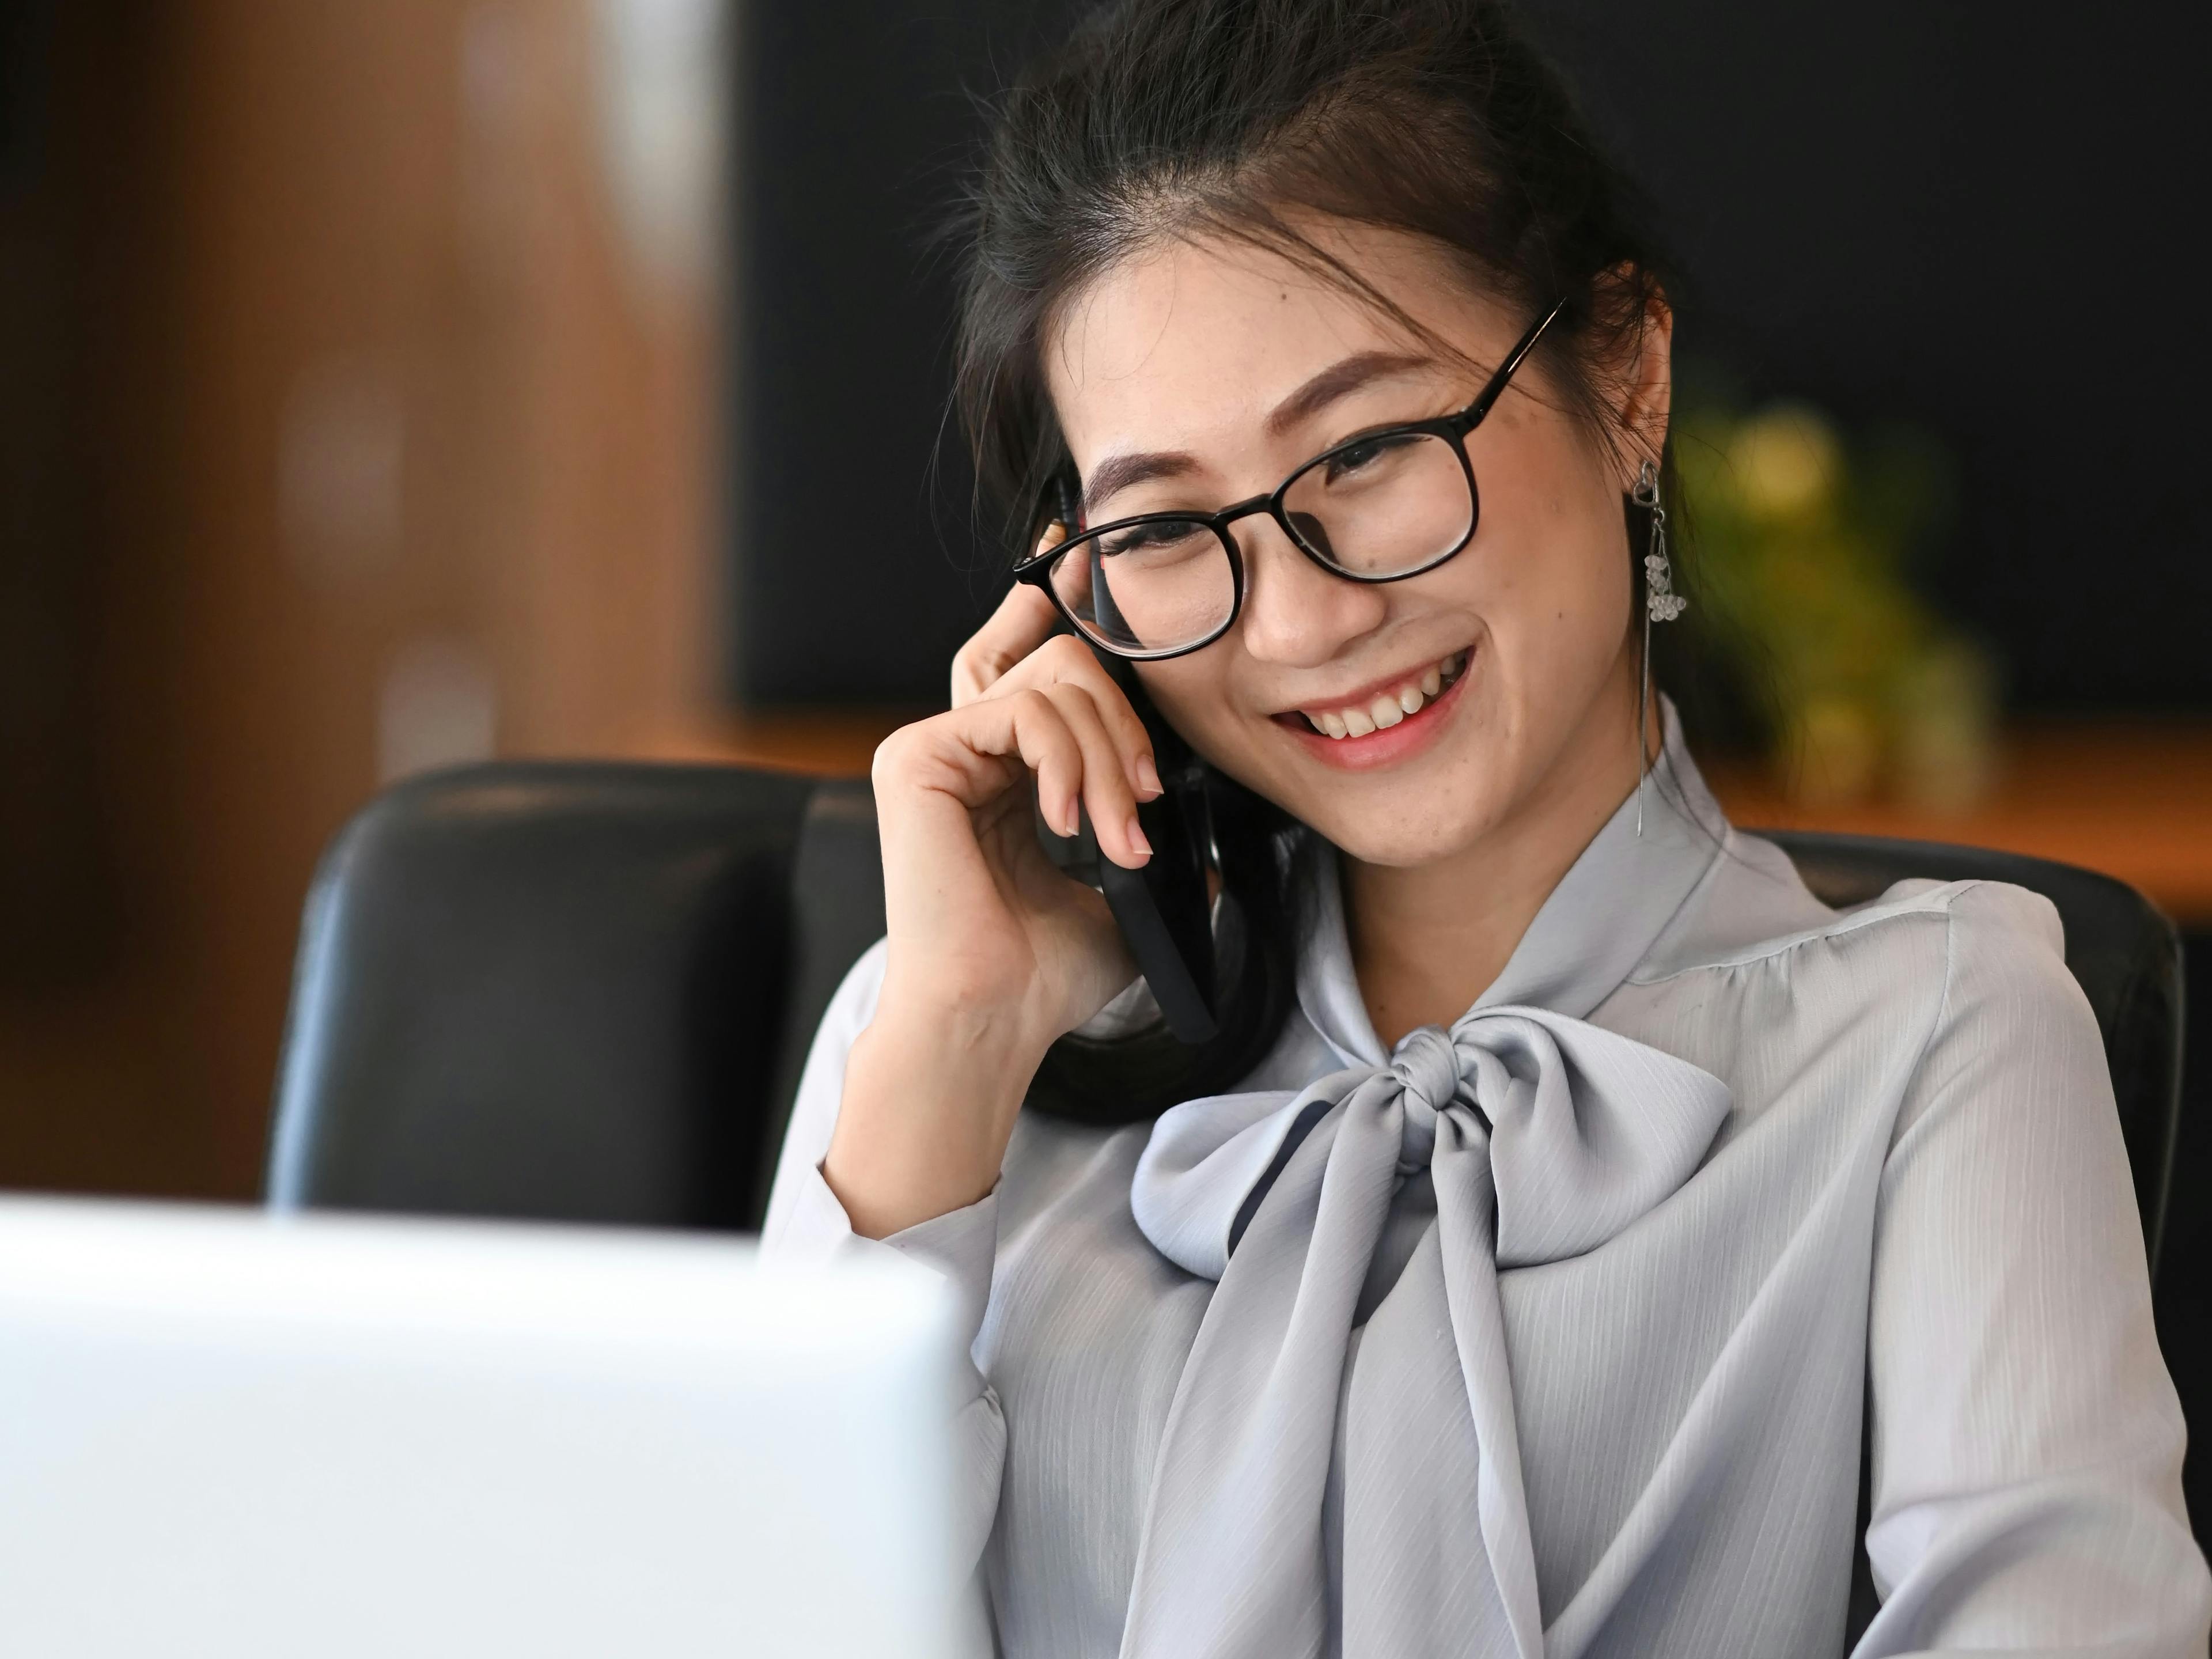 A business woman on a call at her desk